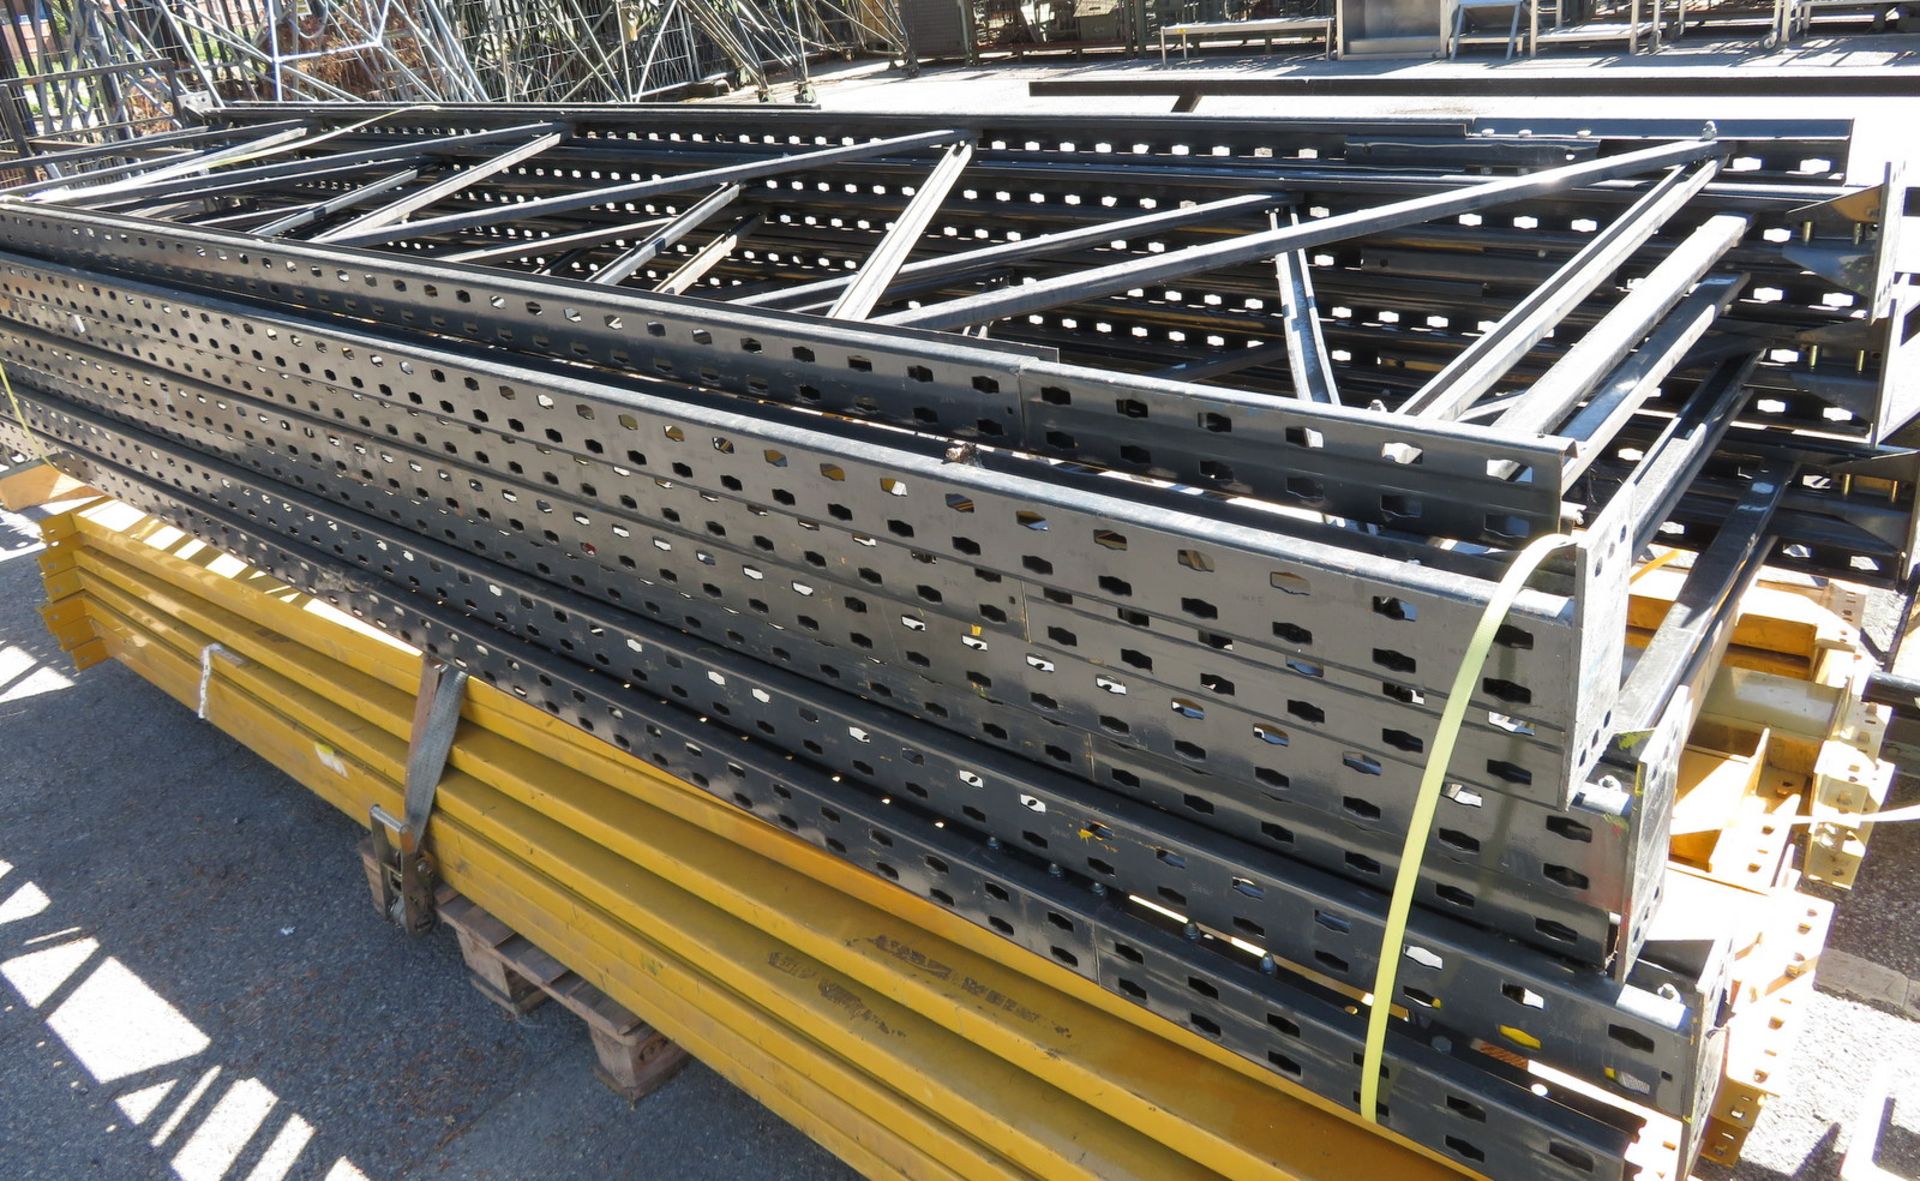 Racking assembly - 7x Uprights - 4500mm high x 1050mm wide, 36x Beams - 3200mm long - Image 2 of 3